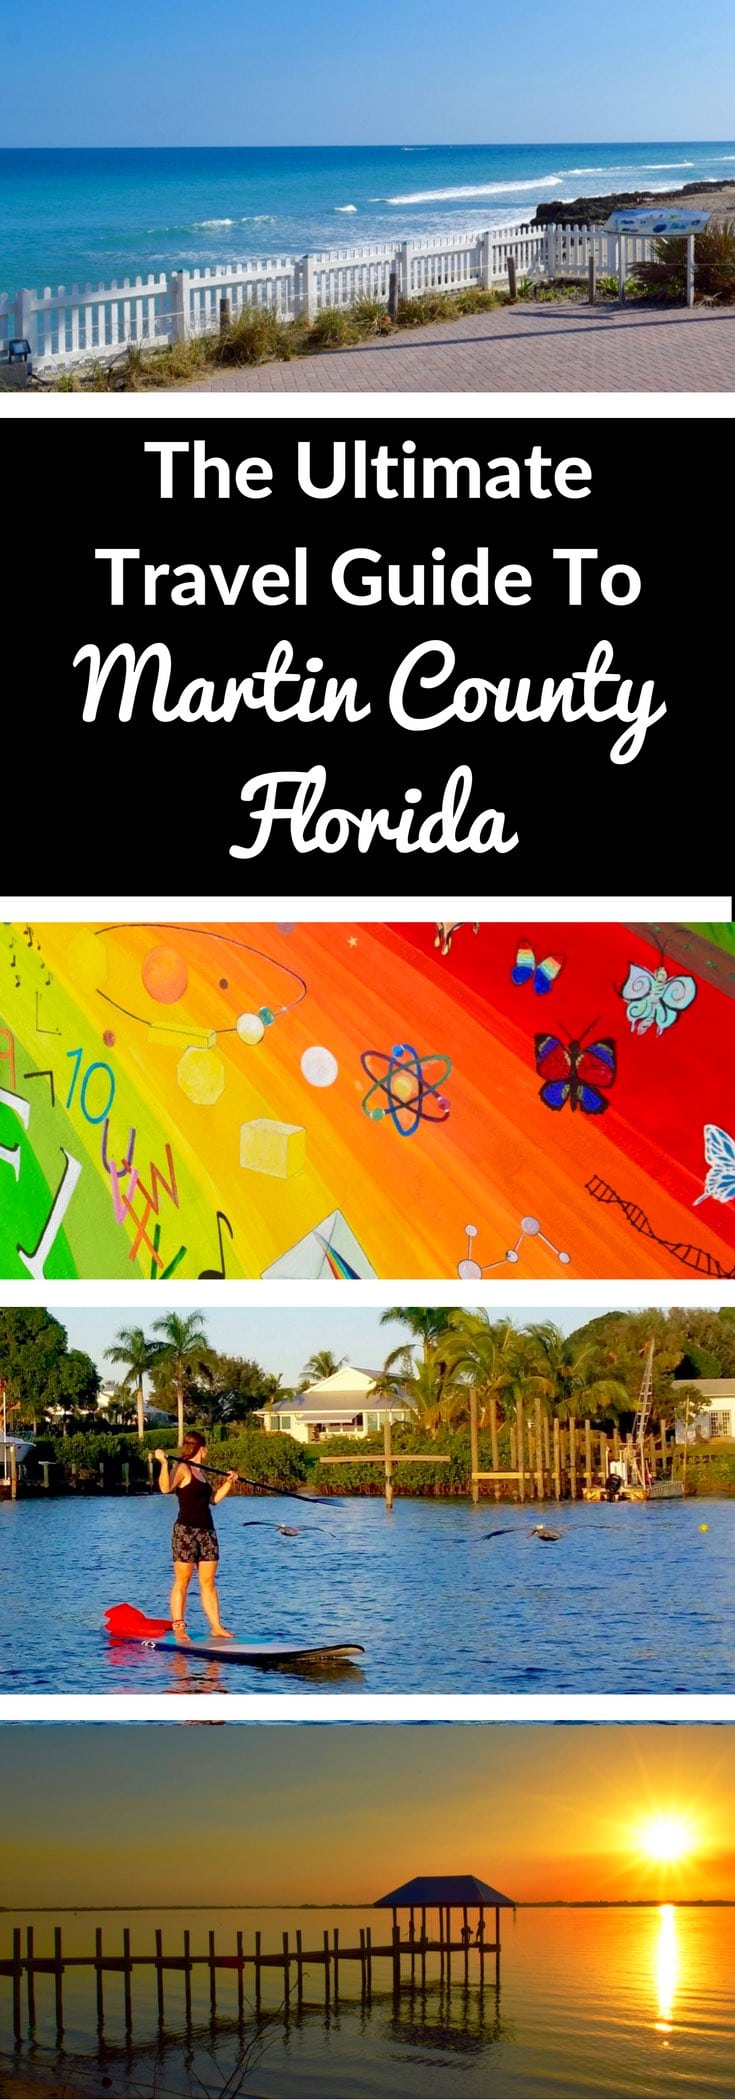 The Ultimate Travel Guide To Martin County, Florida